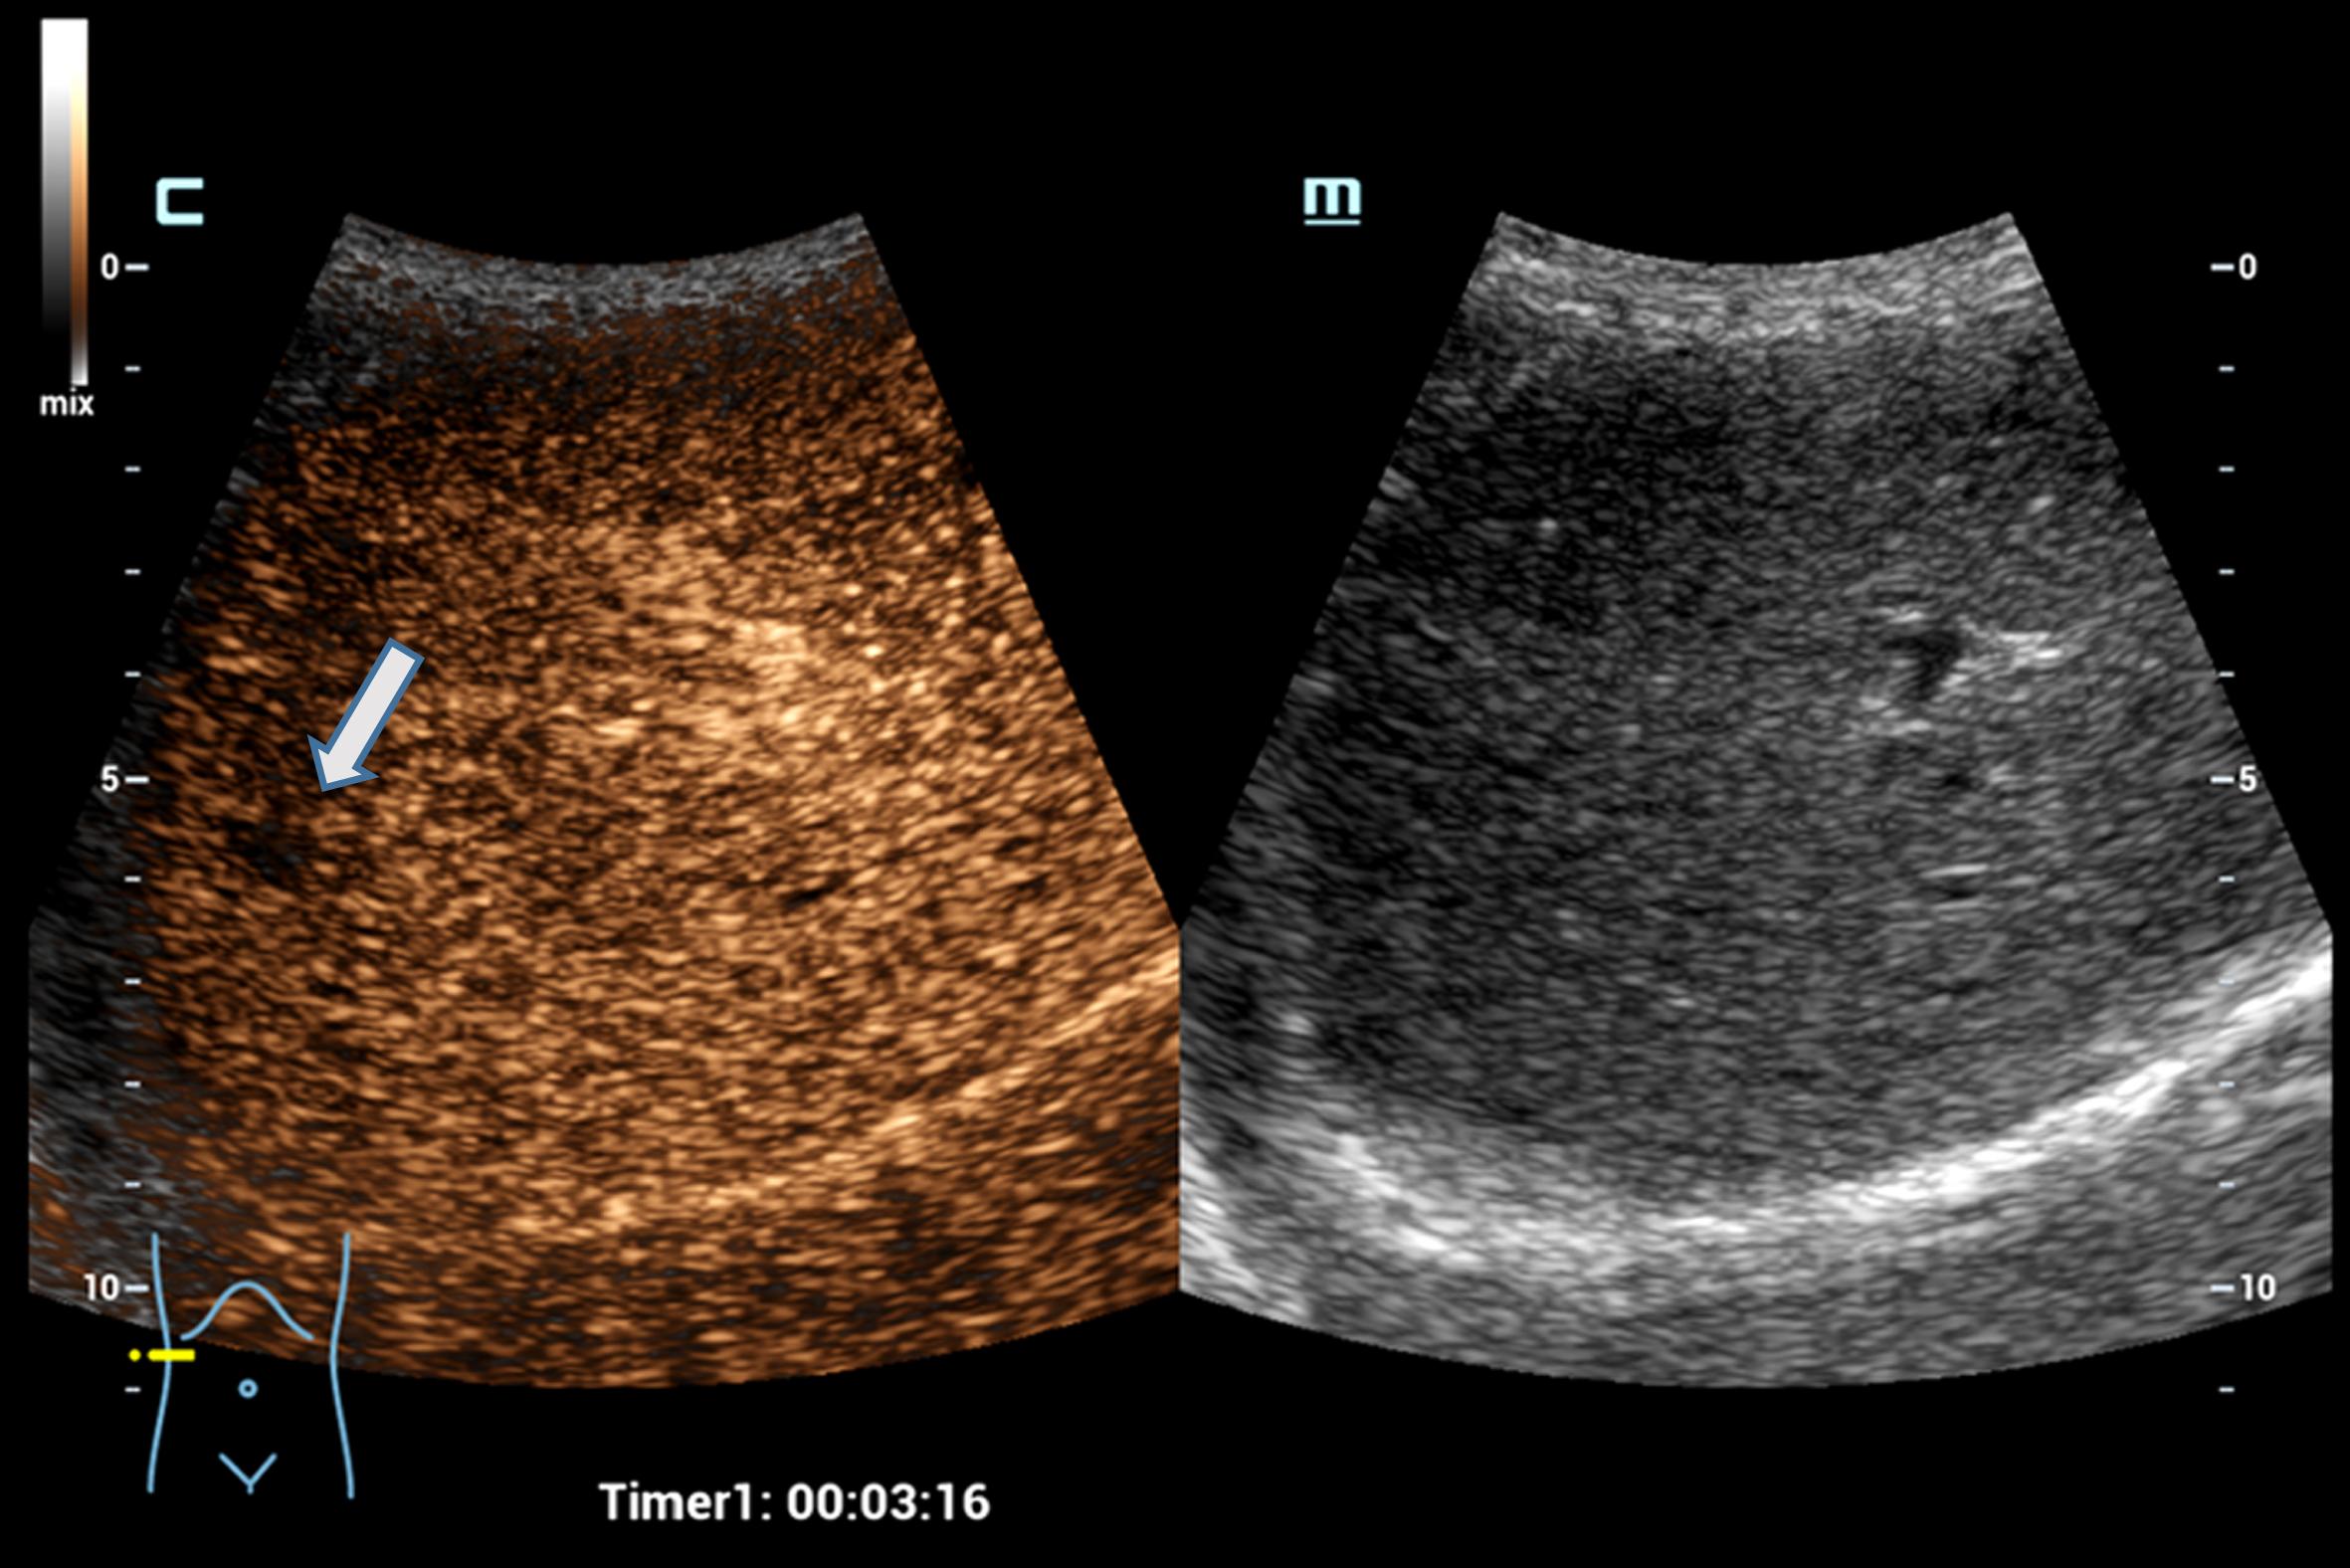 Case of a 76 years old patient with colorectal cancer. Detection of a small liver metastasis of the right liver lobe, less than 1 cm in diameter using the HiFR CEUS technology after bolus injection of 1.5 ml ultrasound contrast agent. Wash out of the non-cystic lesion, image after 3 minutes in the late venous phase (left side, arrow). The lesion is not visible on fundamental B-mode (right side).